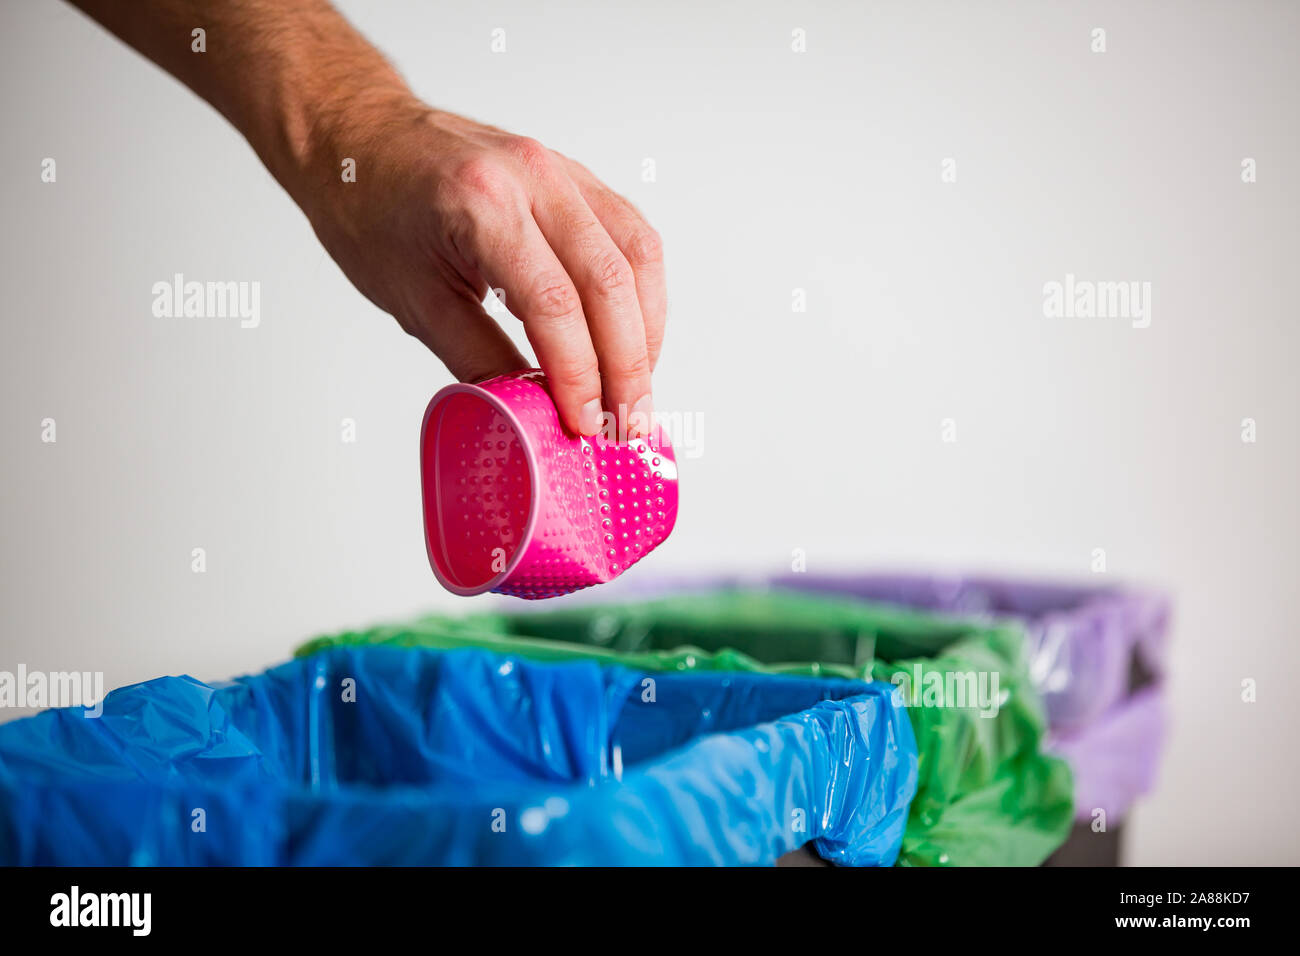 Hand putting single-use plastic cup into recycling bin. Person in a house kitchen separating waste. Black trash bin with green bag and recycling Stock Photo